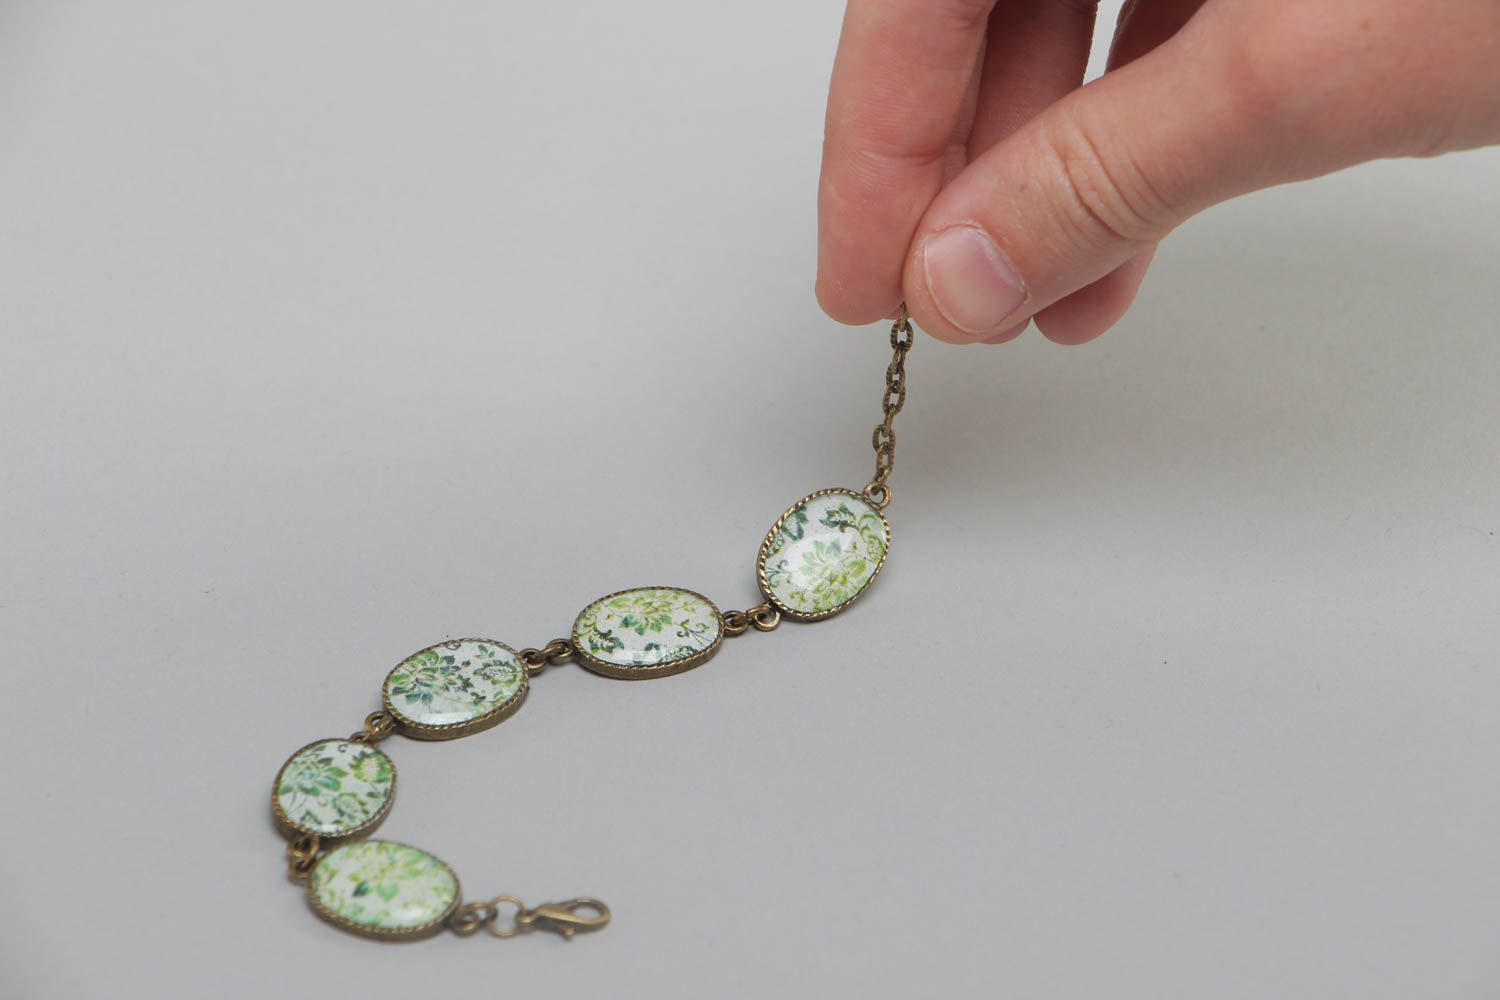 Handmade vintage bracelet made of glass glaze with metal fittings and pendants with green flowers photo 5